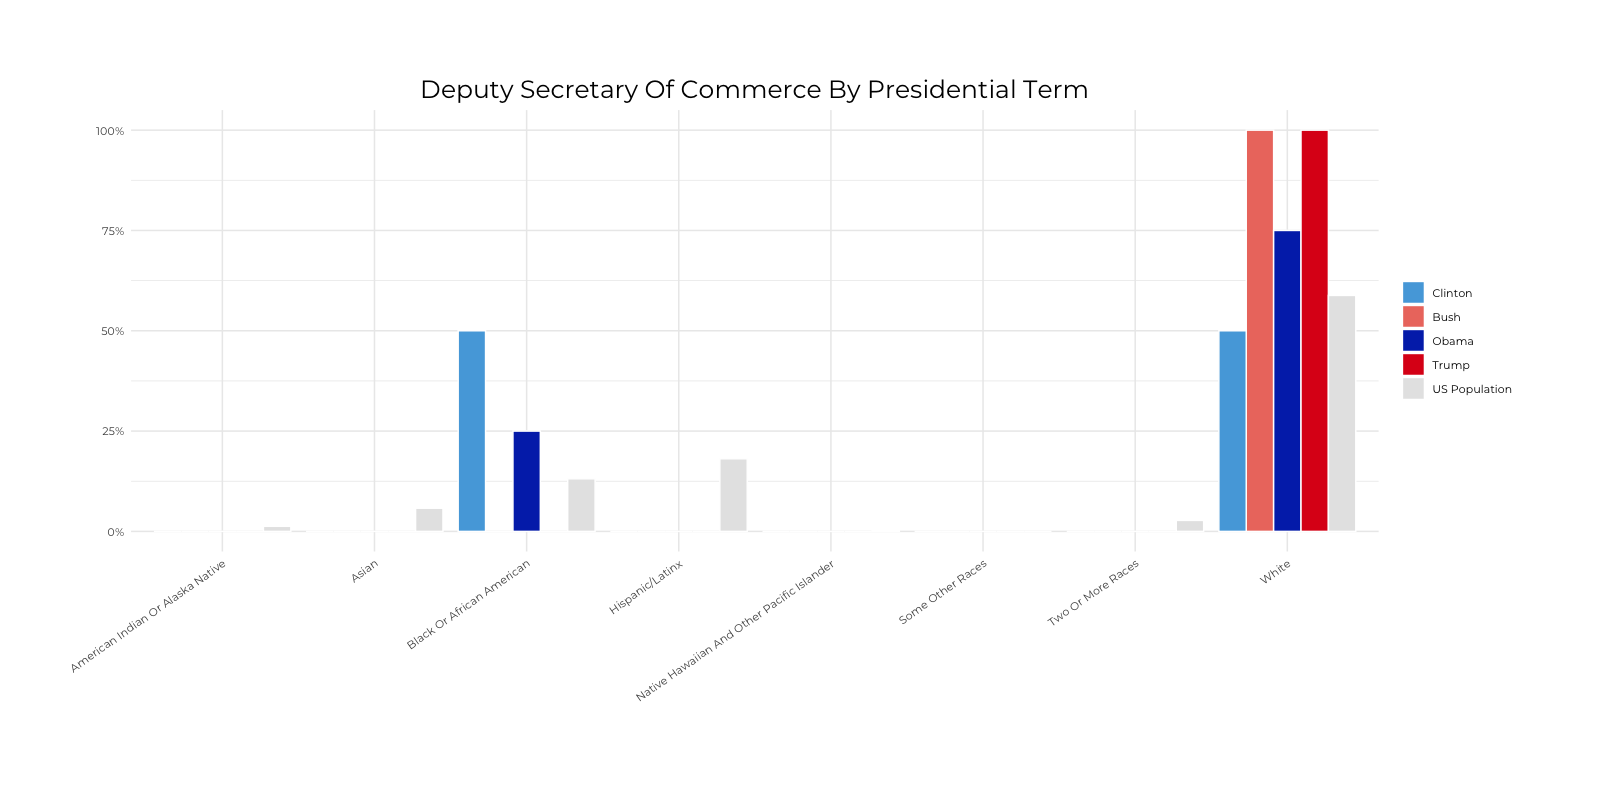 Graph about Racial Composition Comparison of Deputy Secretary of Commerce by Presidential Terms. More detailed text description below.